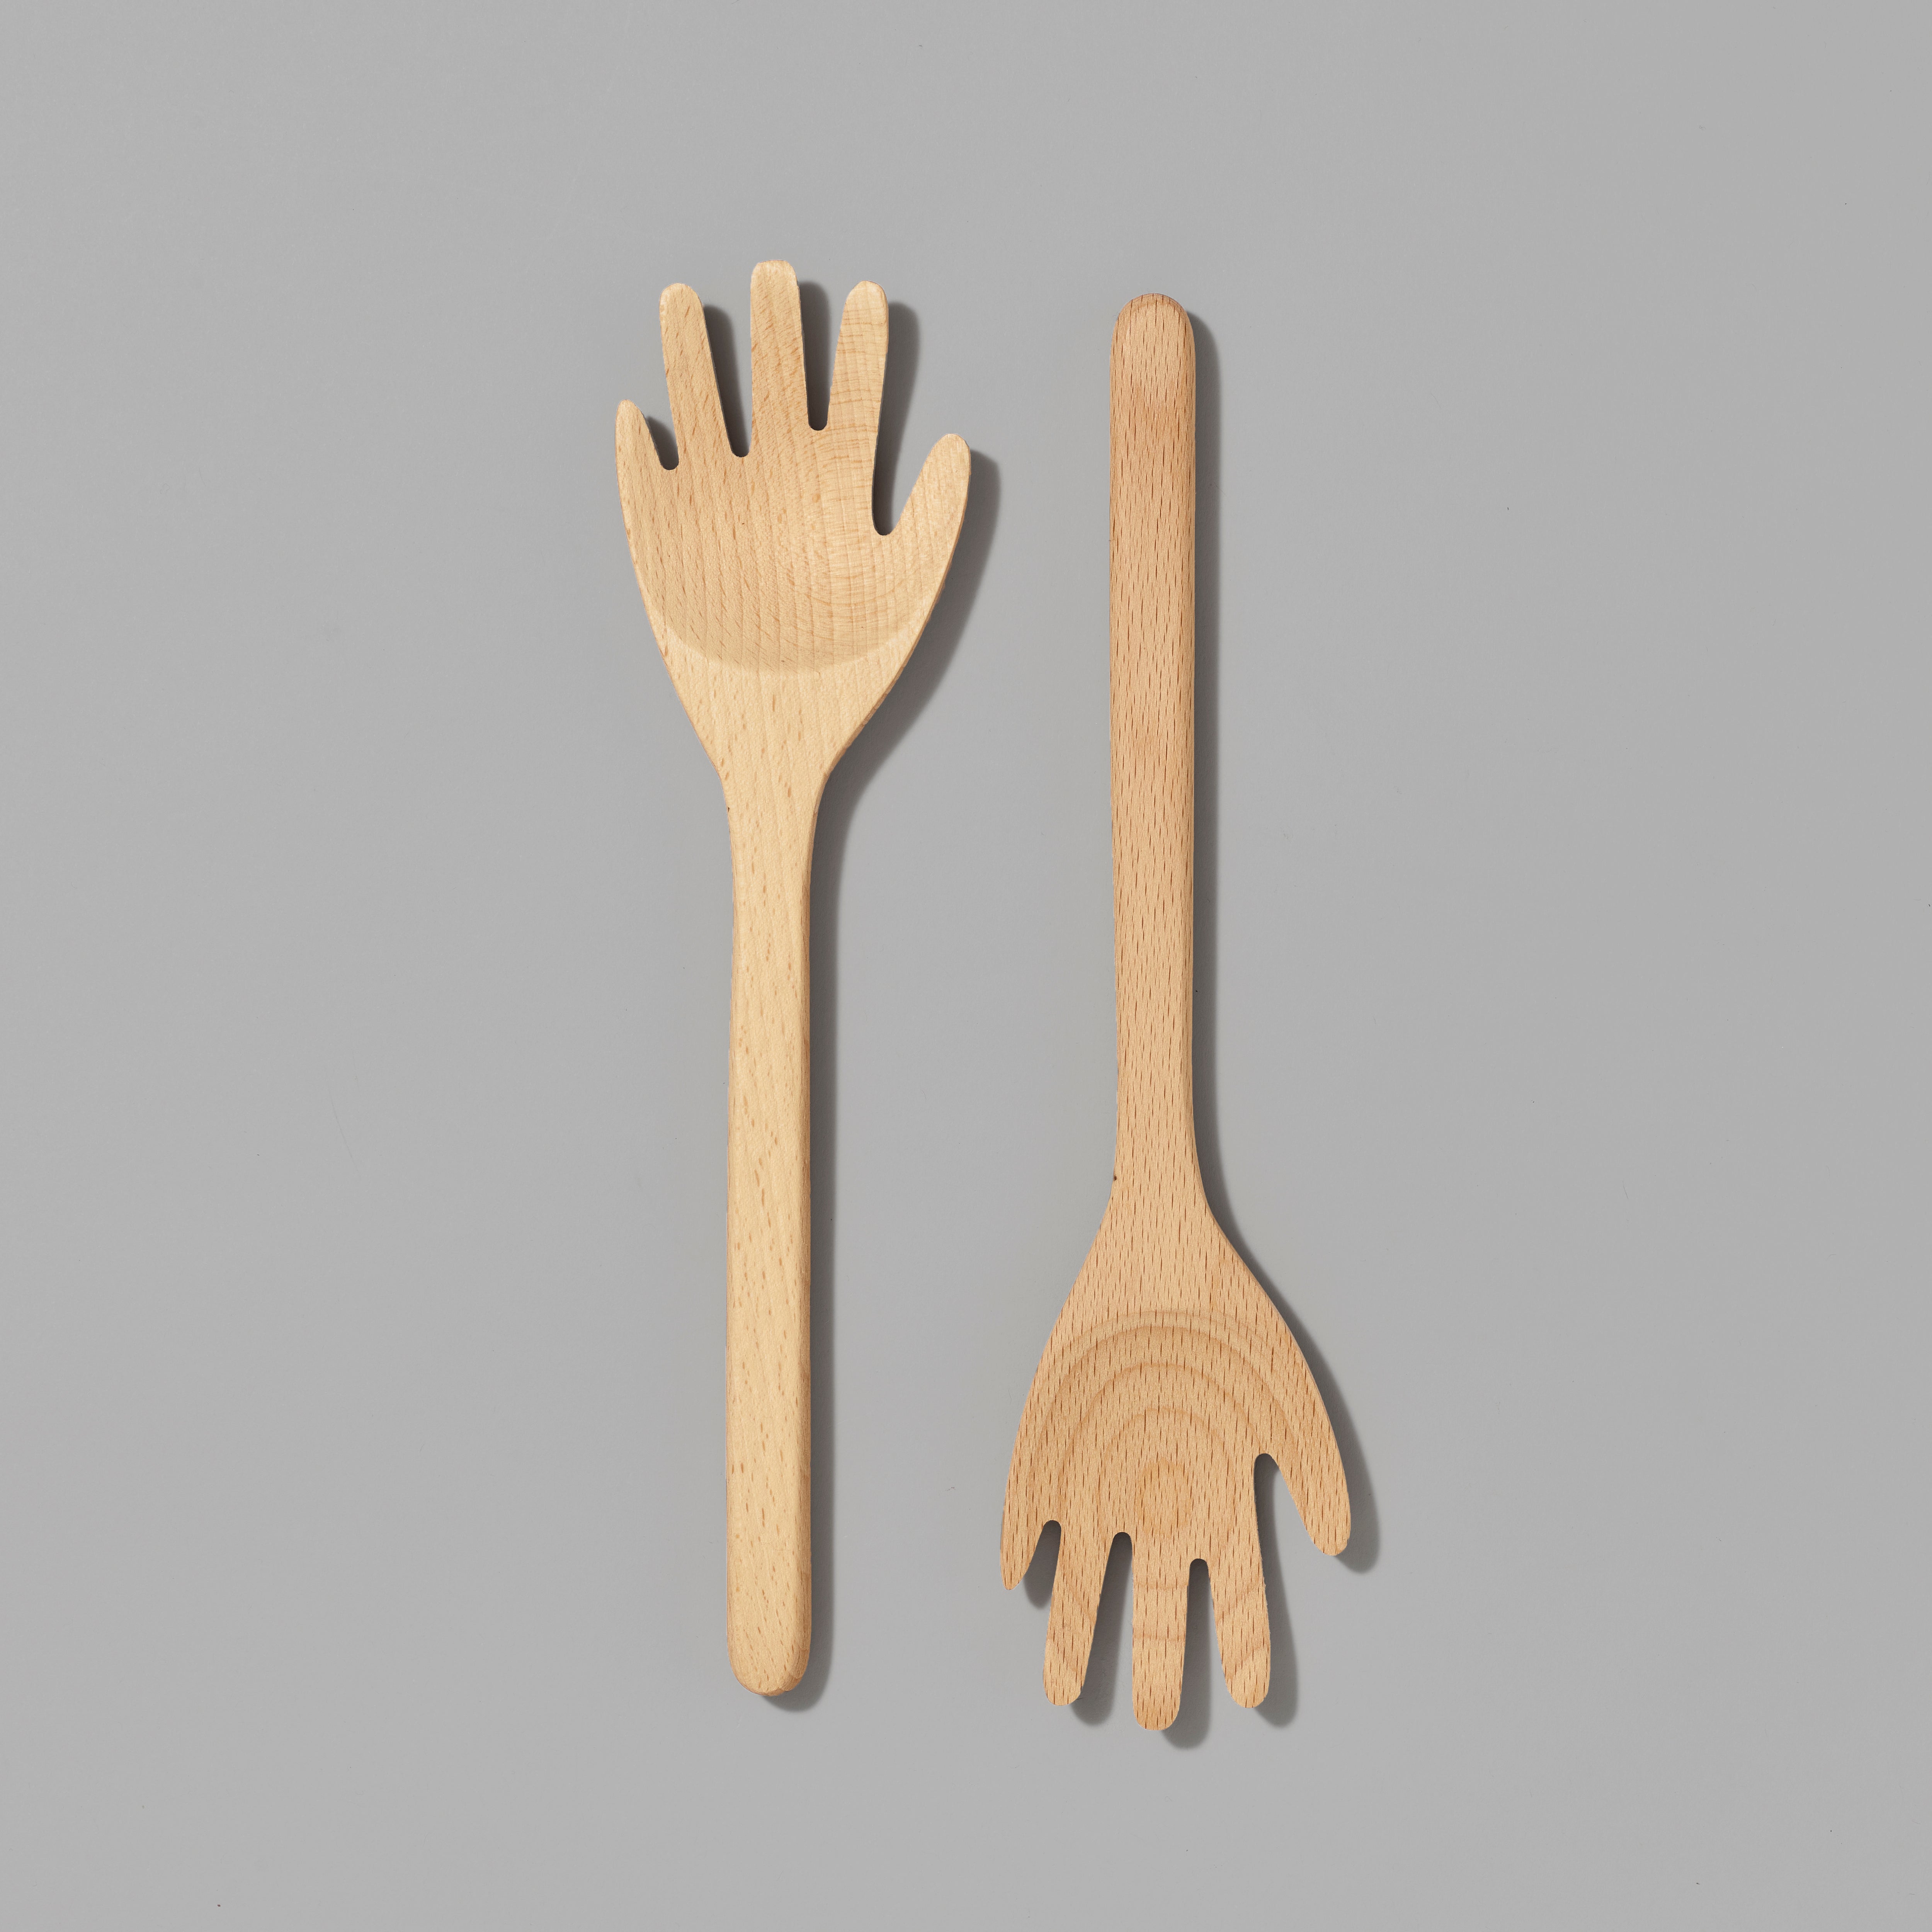 Set of 2 Beech wood hand-shaped serving spoons. Each measures" 3 x 12".